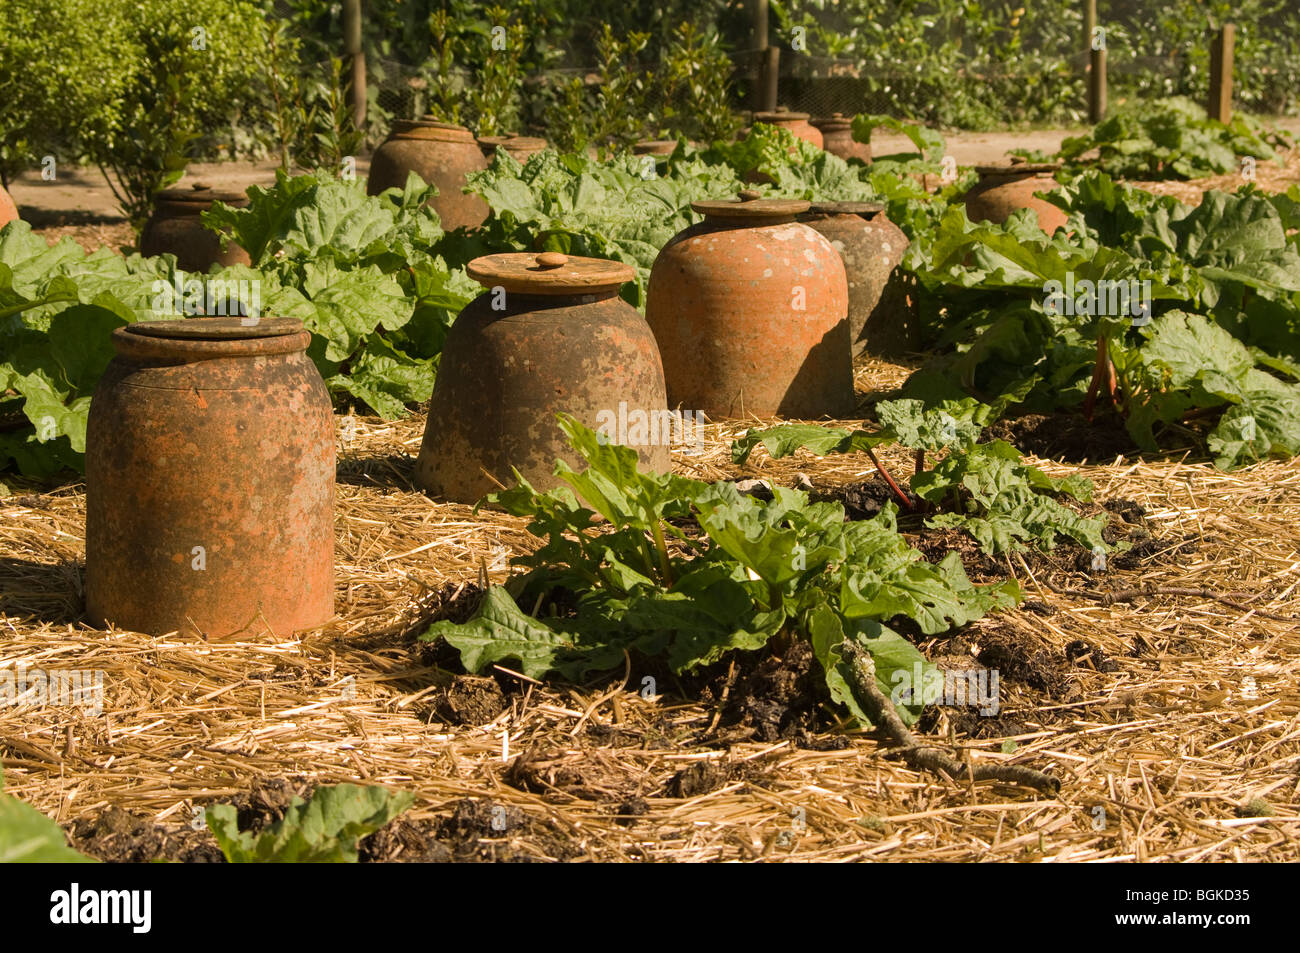 Rhubarb growing on a straw bed with terracotta forcers in the background Stock Photo